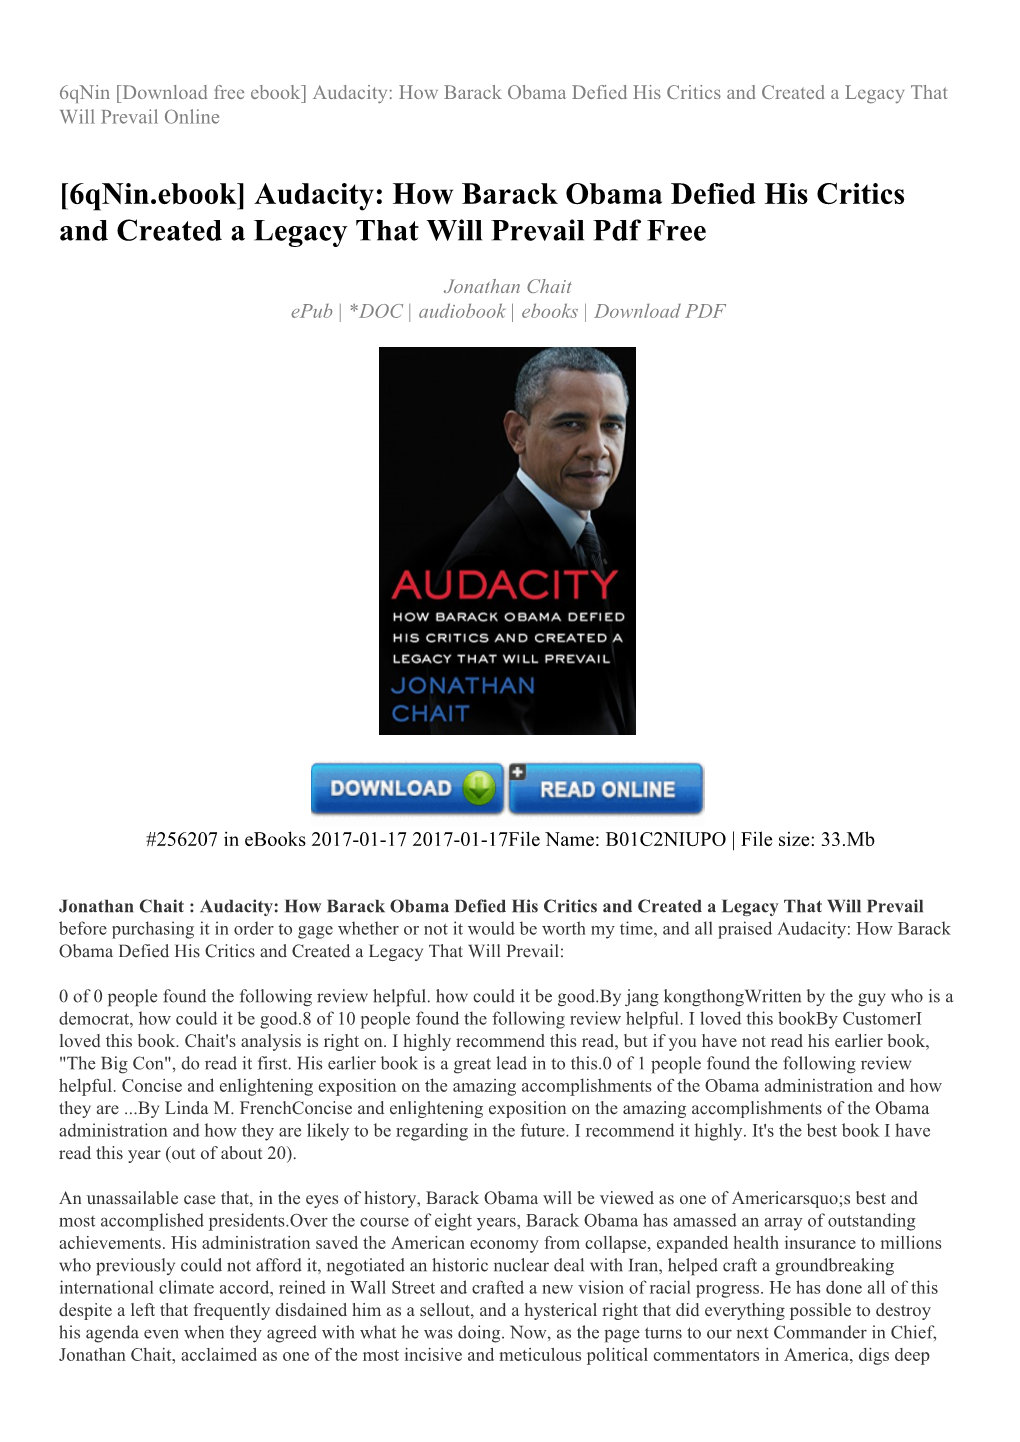 Audacity: How Barack Obama Defied His Critics and Created a Legacy That Will Prevail Online